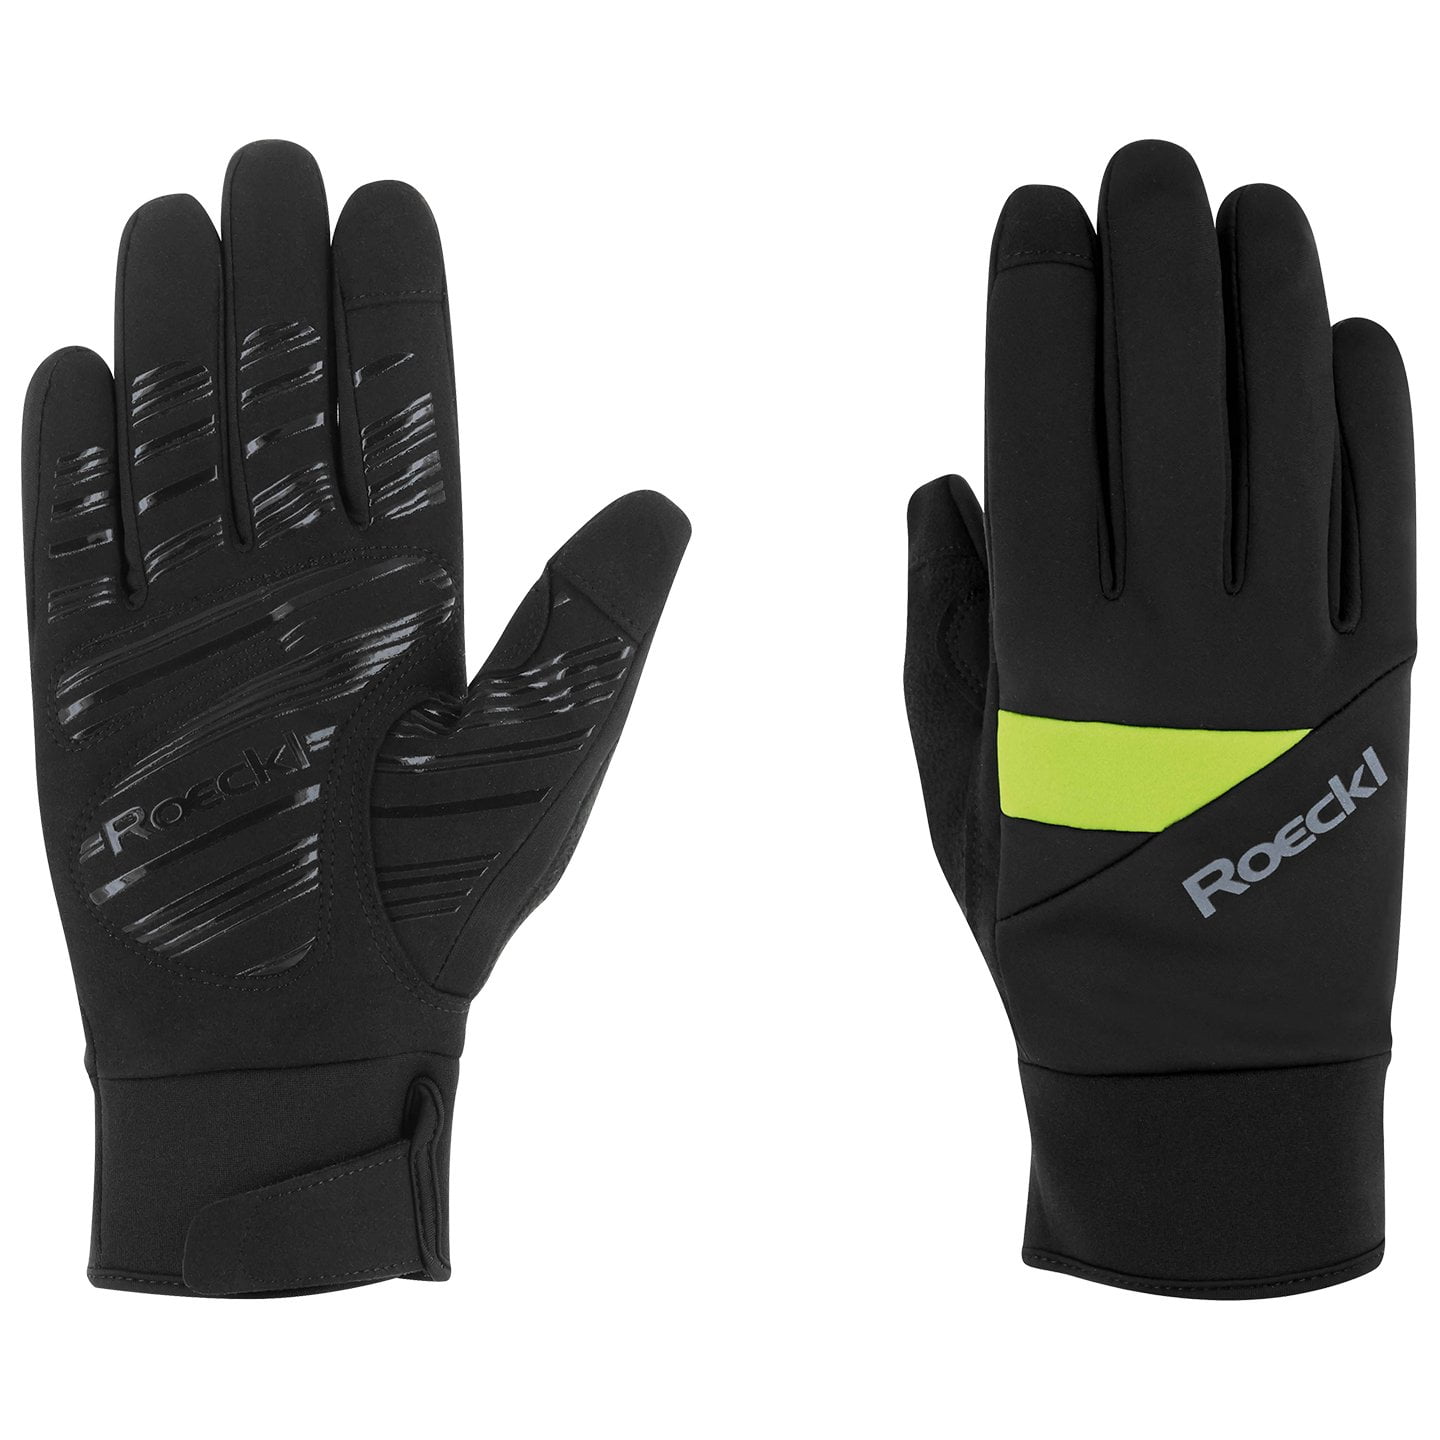 ROECKL Reichenthal Winter Gloves Winter Cycling Gloves, for men, size 7,5, MTB gloves, MTB clothing